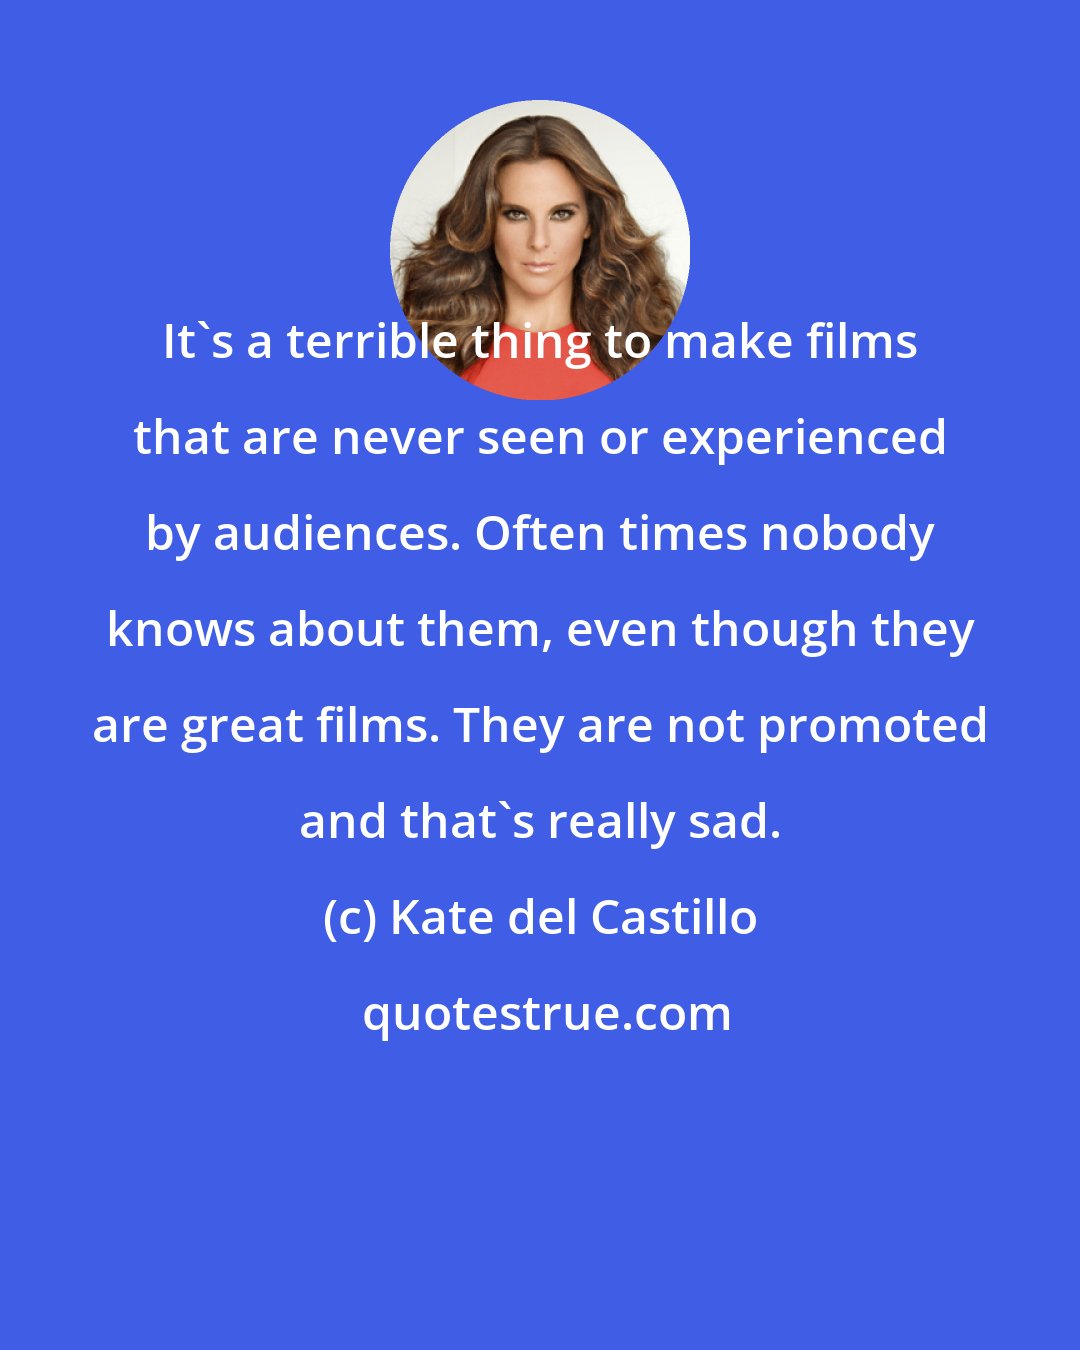 Kate del Castillo: It's a terrible thing to make films that are never seen or experienced by audiences. Often times nobody knows about them, even though they are great films. They are not promoted and that's really sad.